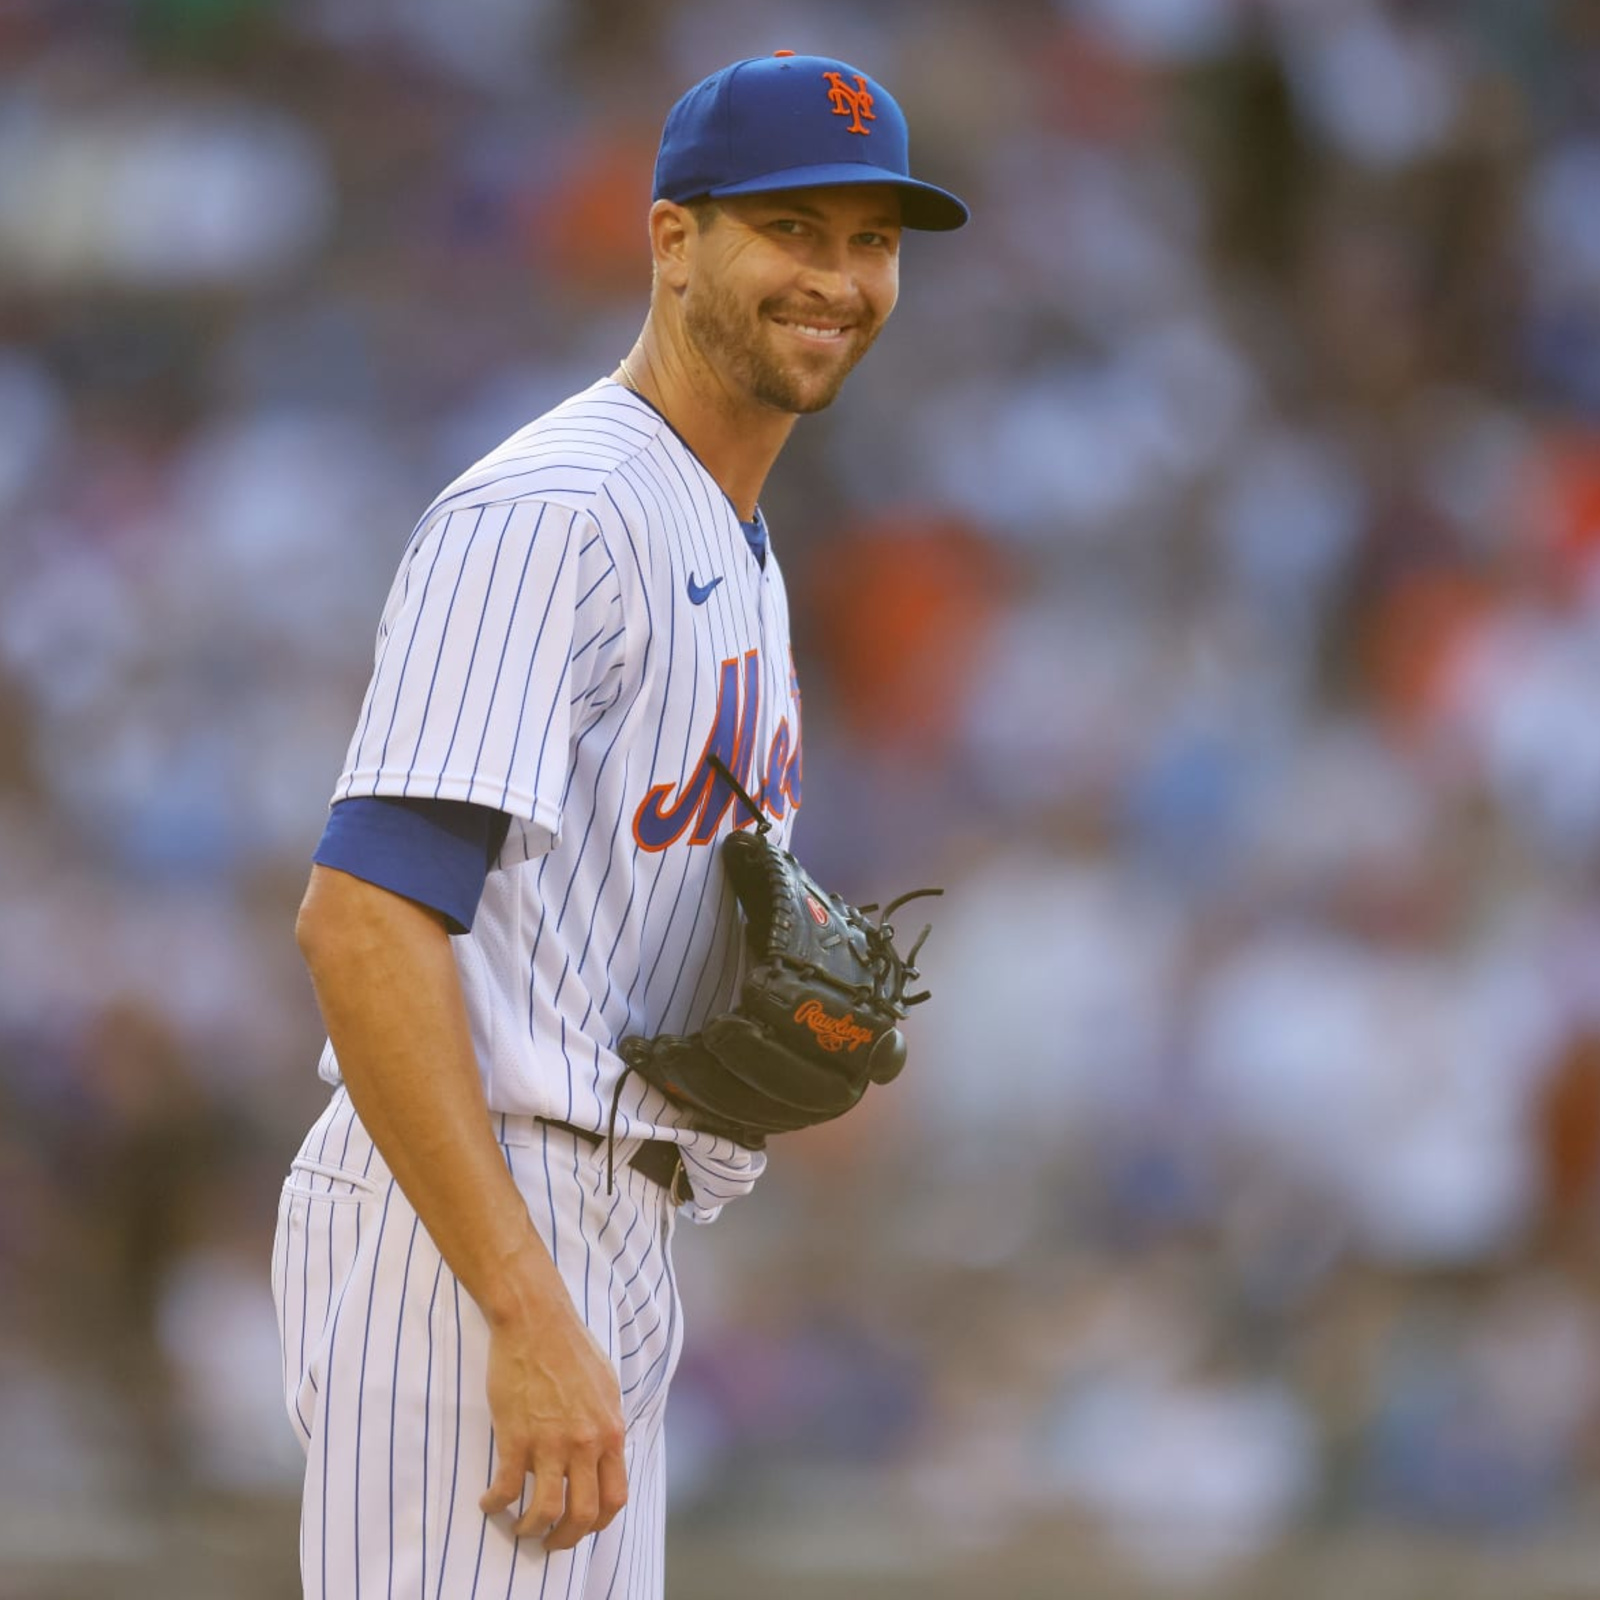 Mets' Jacob deGrom: 1st Start at Citi Field Since Injury Was 'A